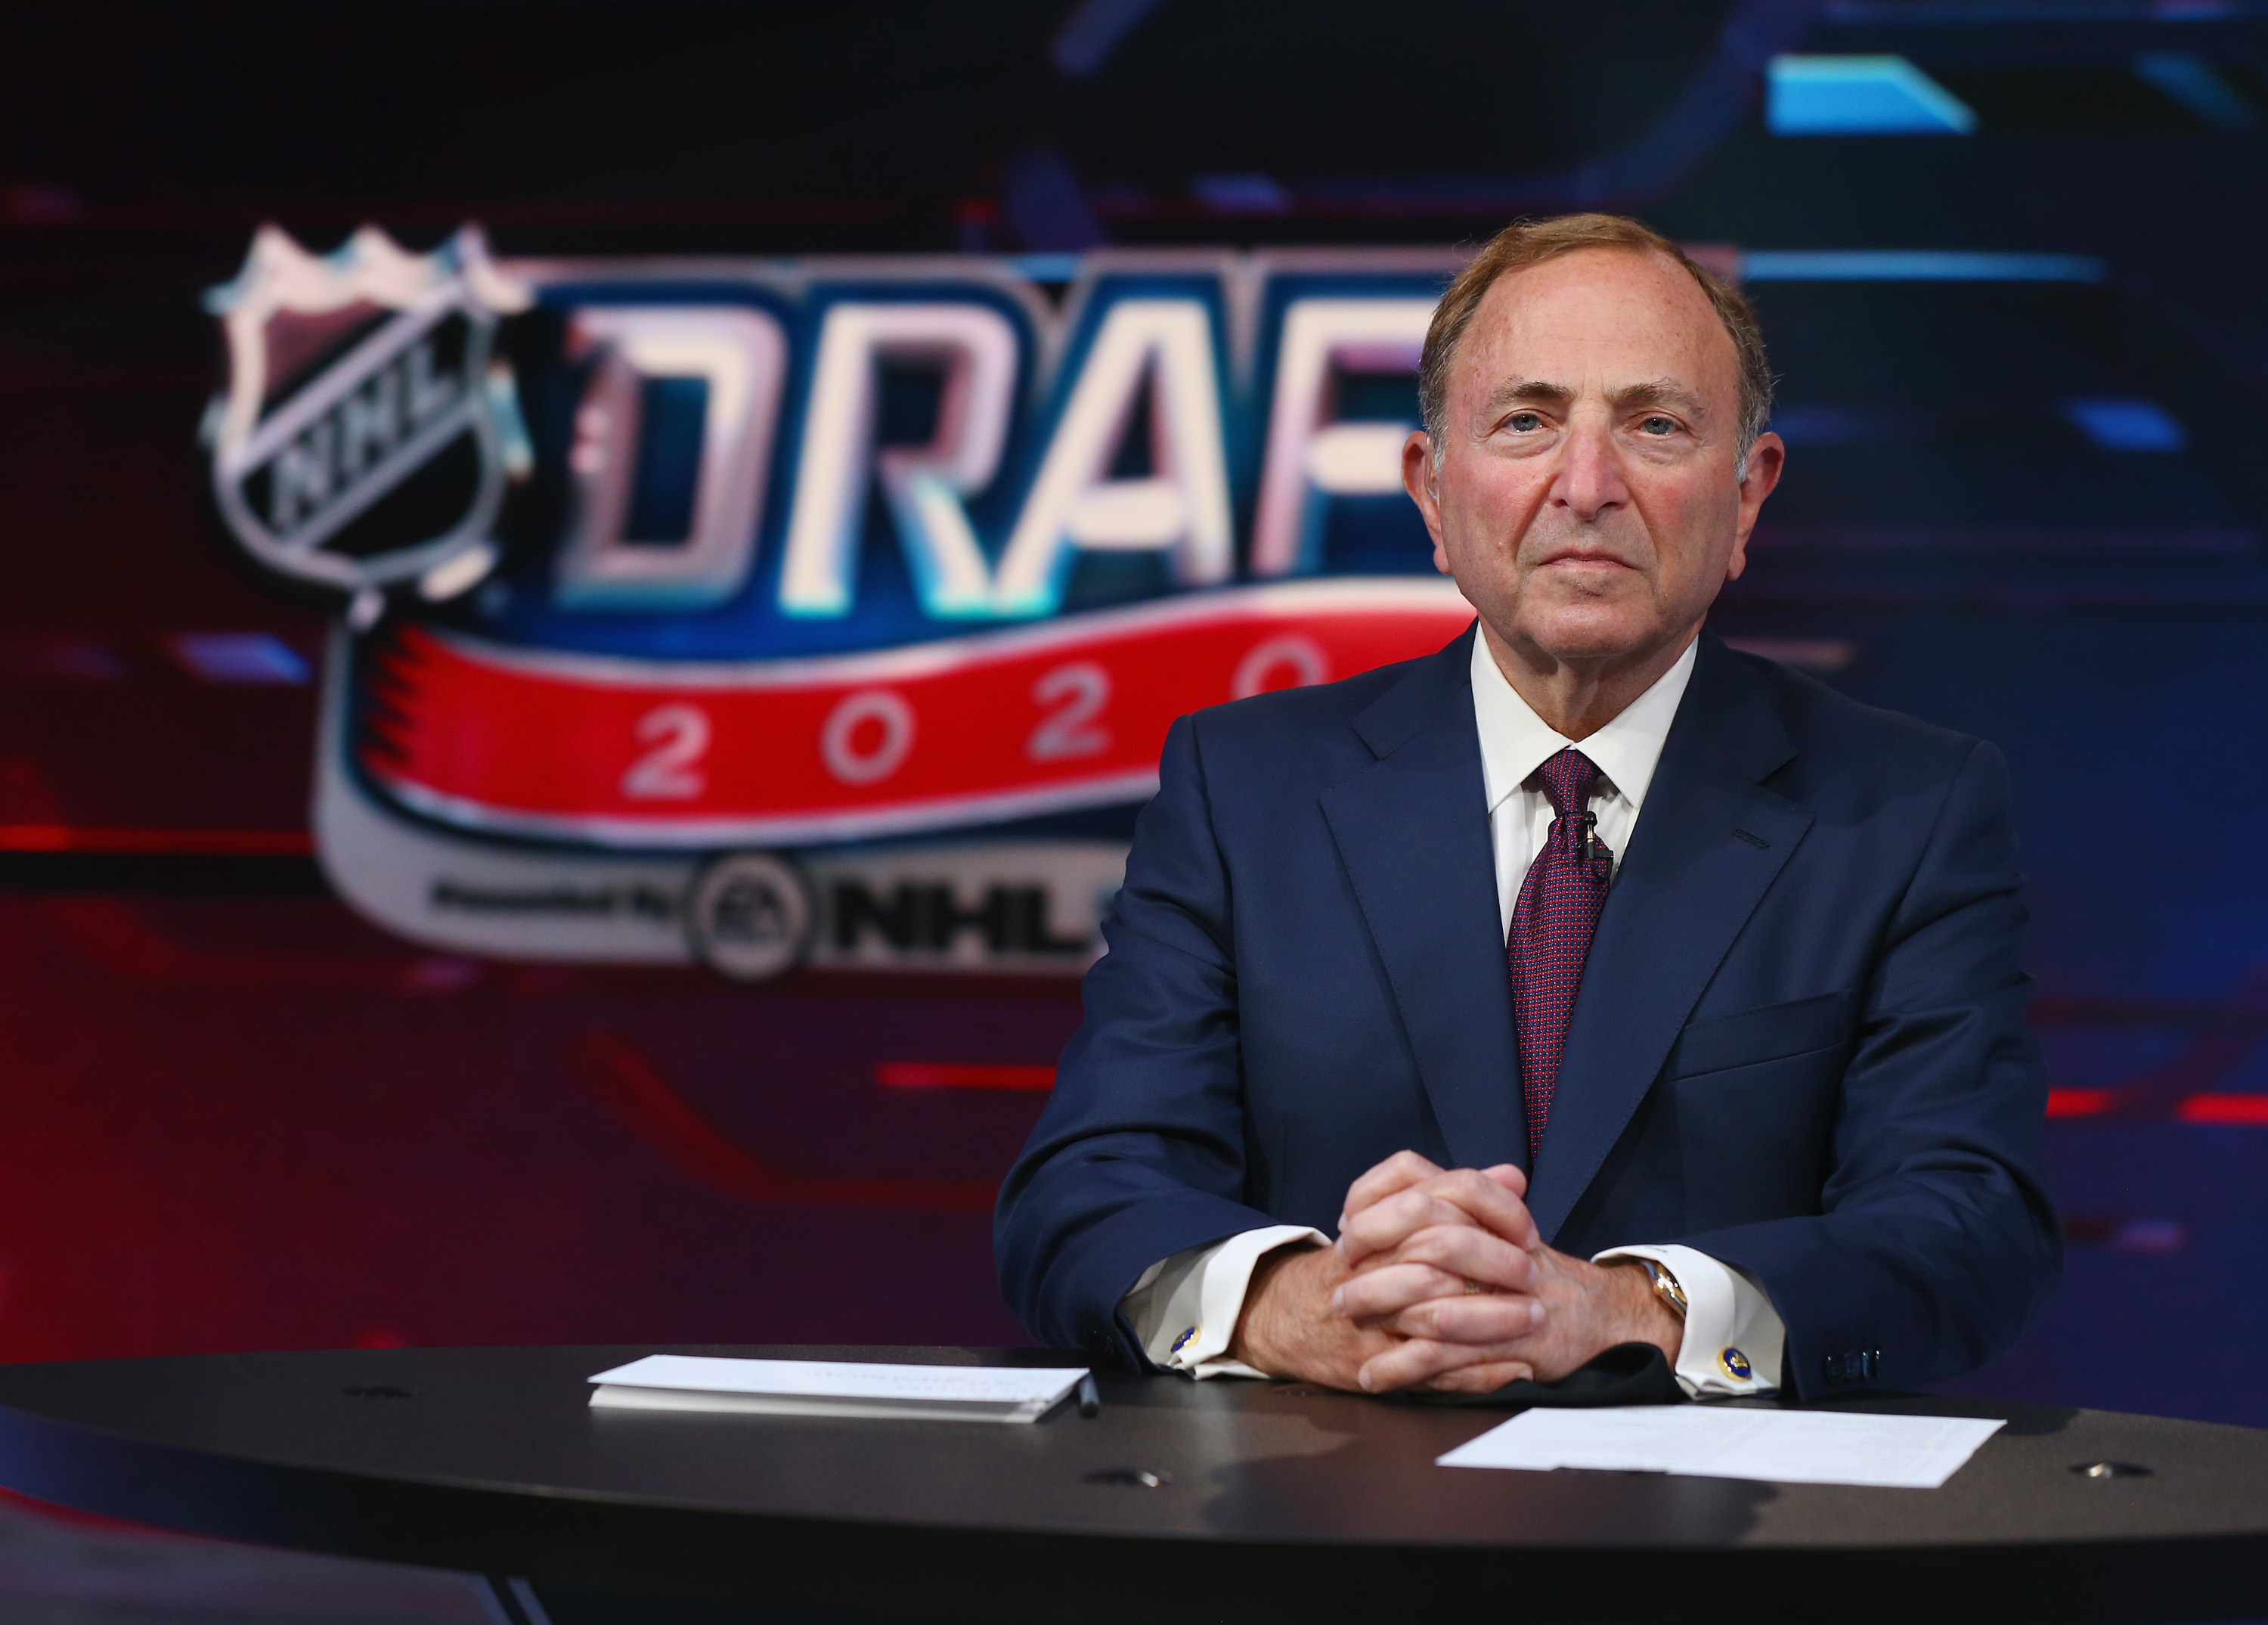 SECAUCUS, NEW JERSEY - OCTOBER 06: NHL commissioner Gary Bettman prepares for the first round of the 2020 National Hockey League Draft at the NHL Network Studio on October 06, 2020 in Secaucus, New Jersey.